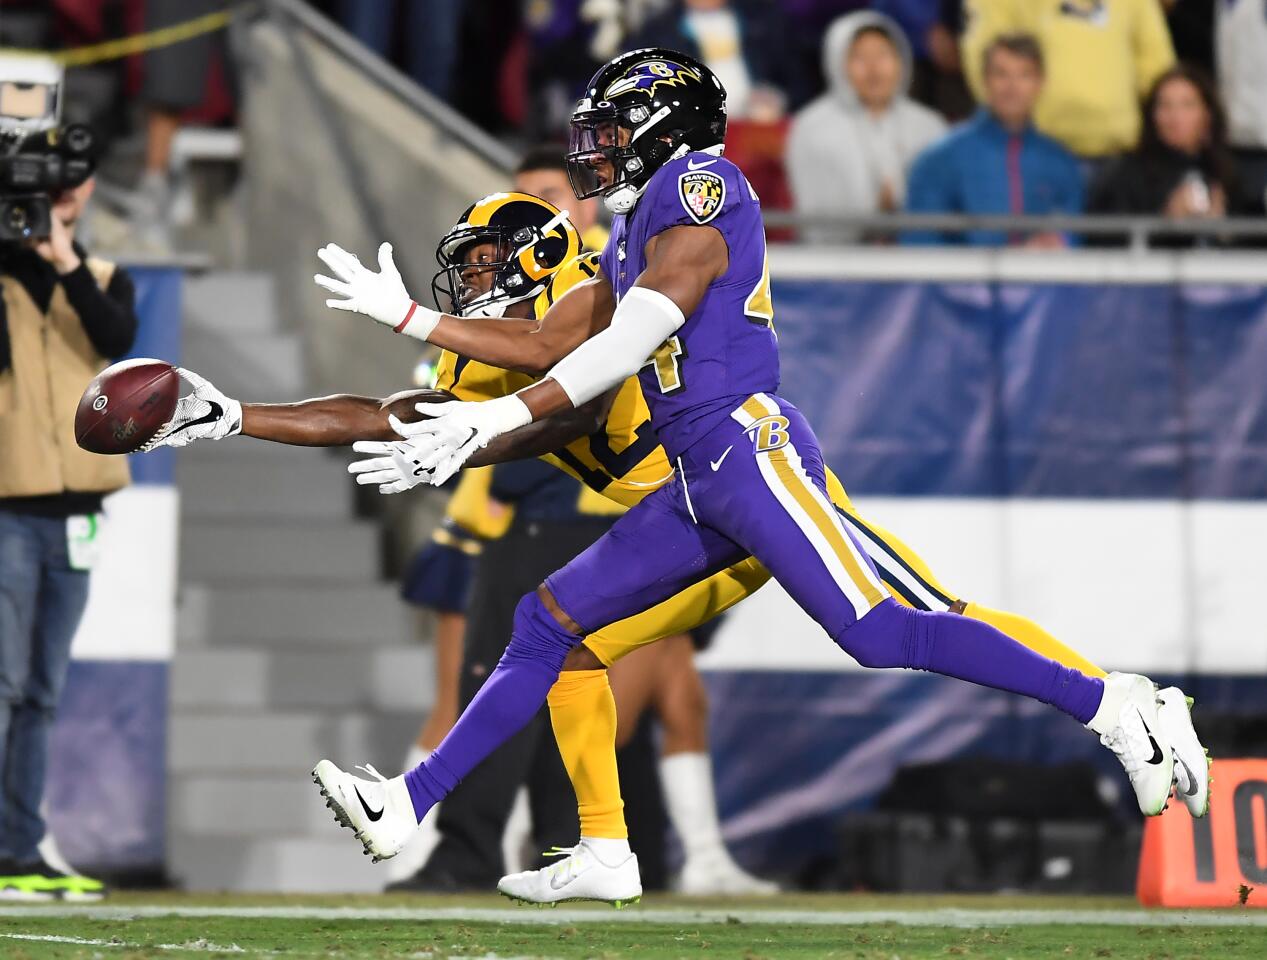 Rams receiver Robert Woods can't make the catch in front of Ravens cornerback Marlon Humphrey during the second quarter of a game Nov. 25 at the Coliseum.